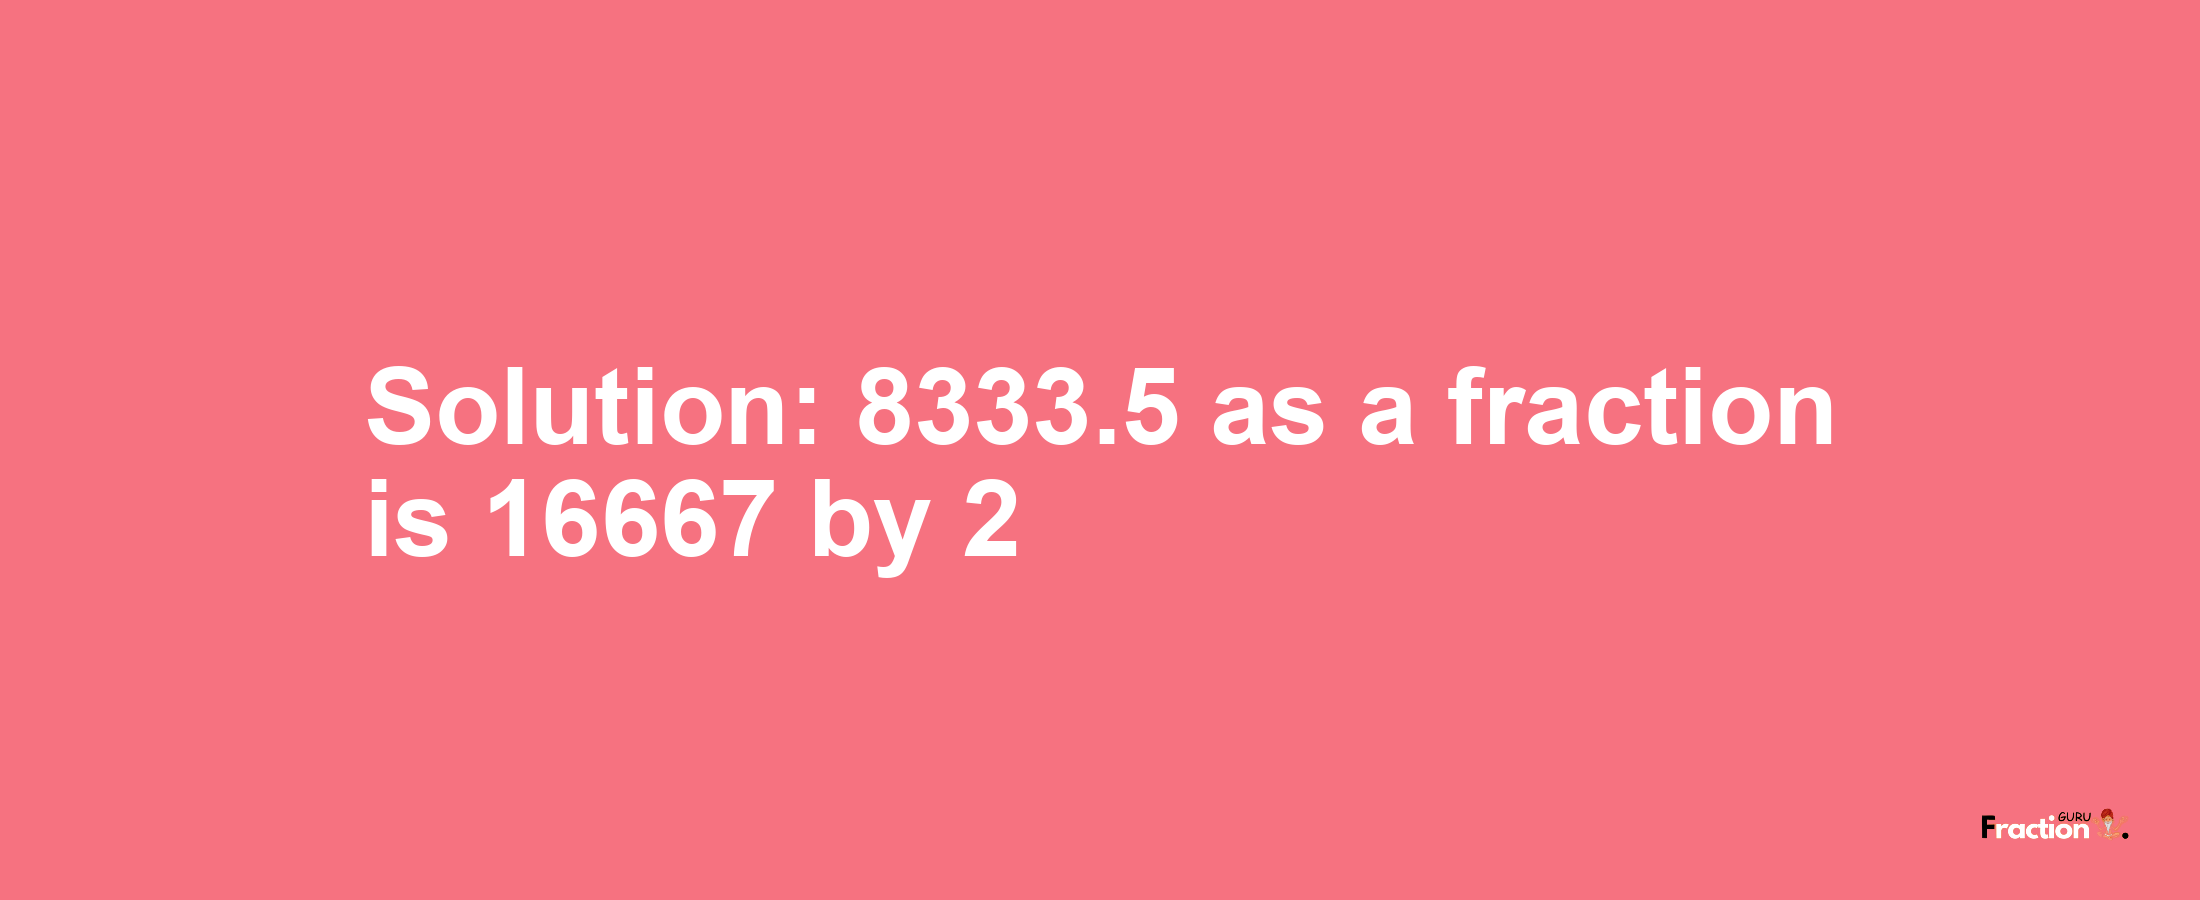 Solution:8333.5 as a fraction is 16667/2